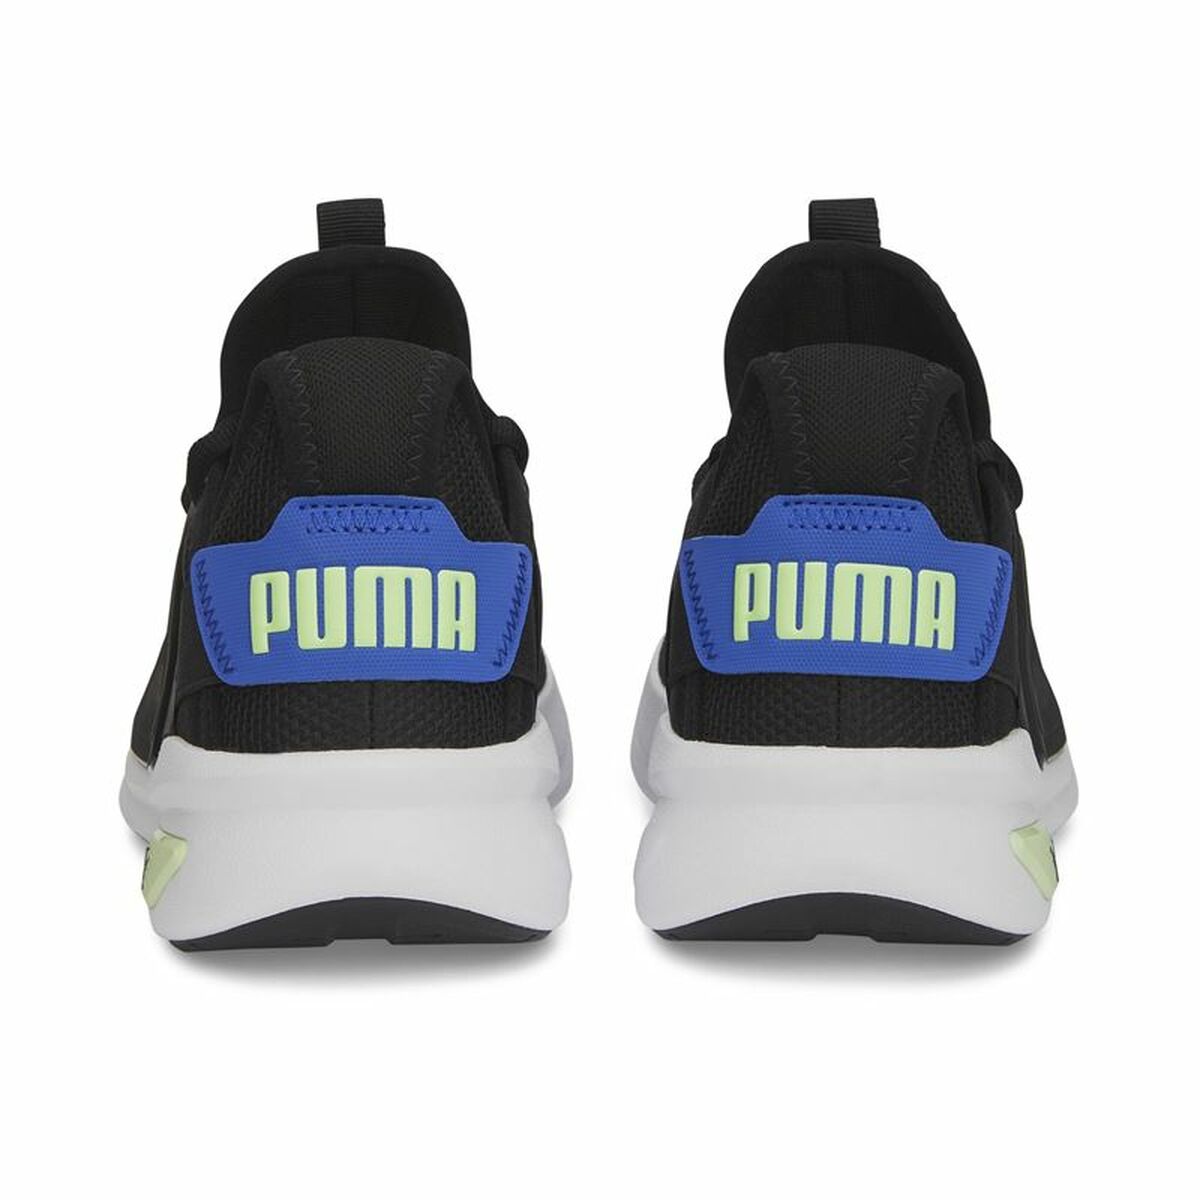 Running Shoes for Adults Puma Softride Enzo Evo Black Unisex